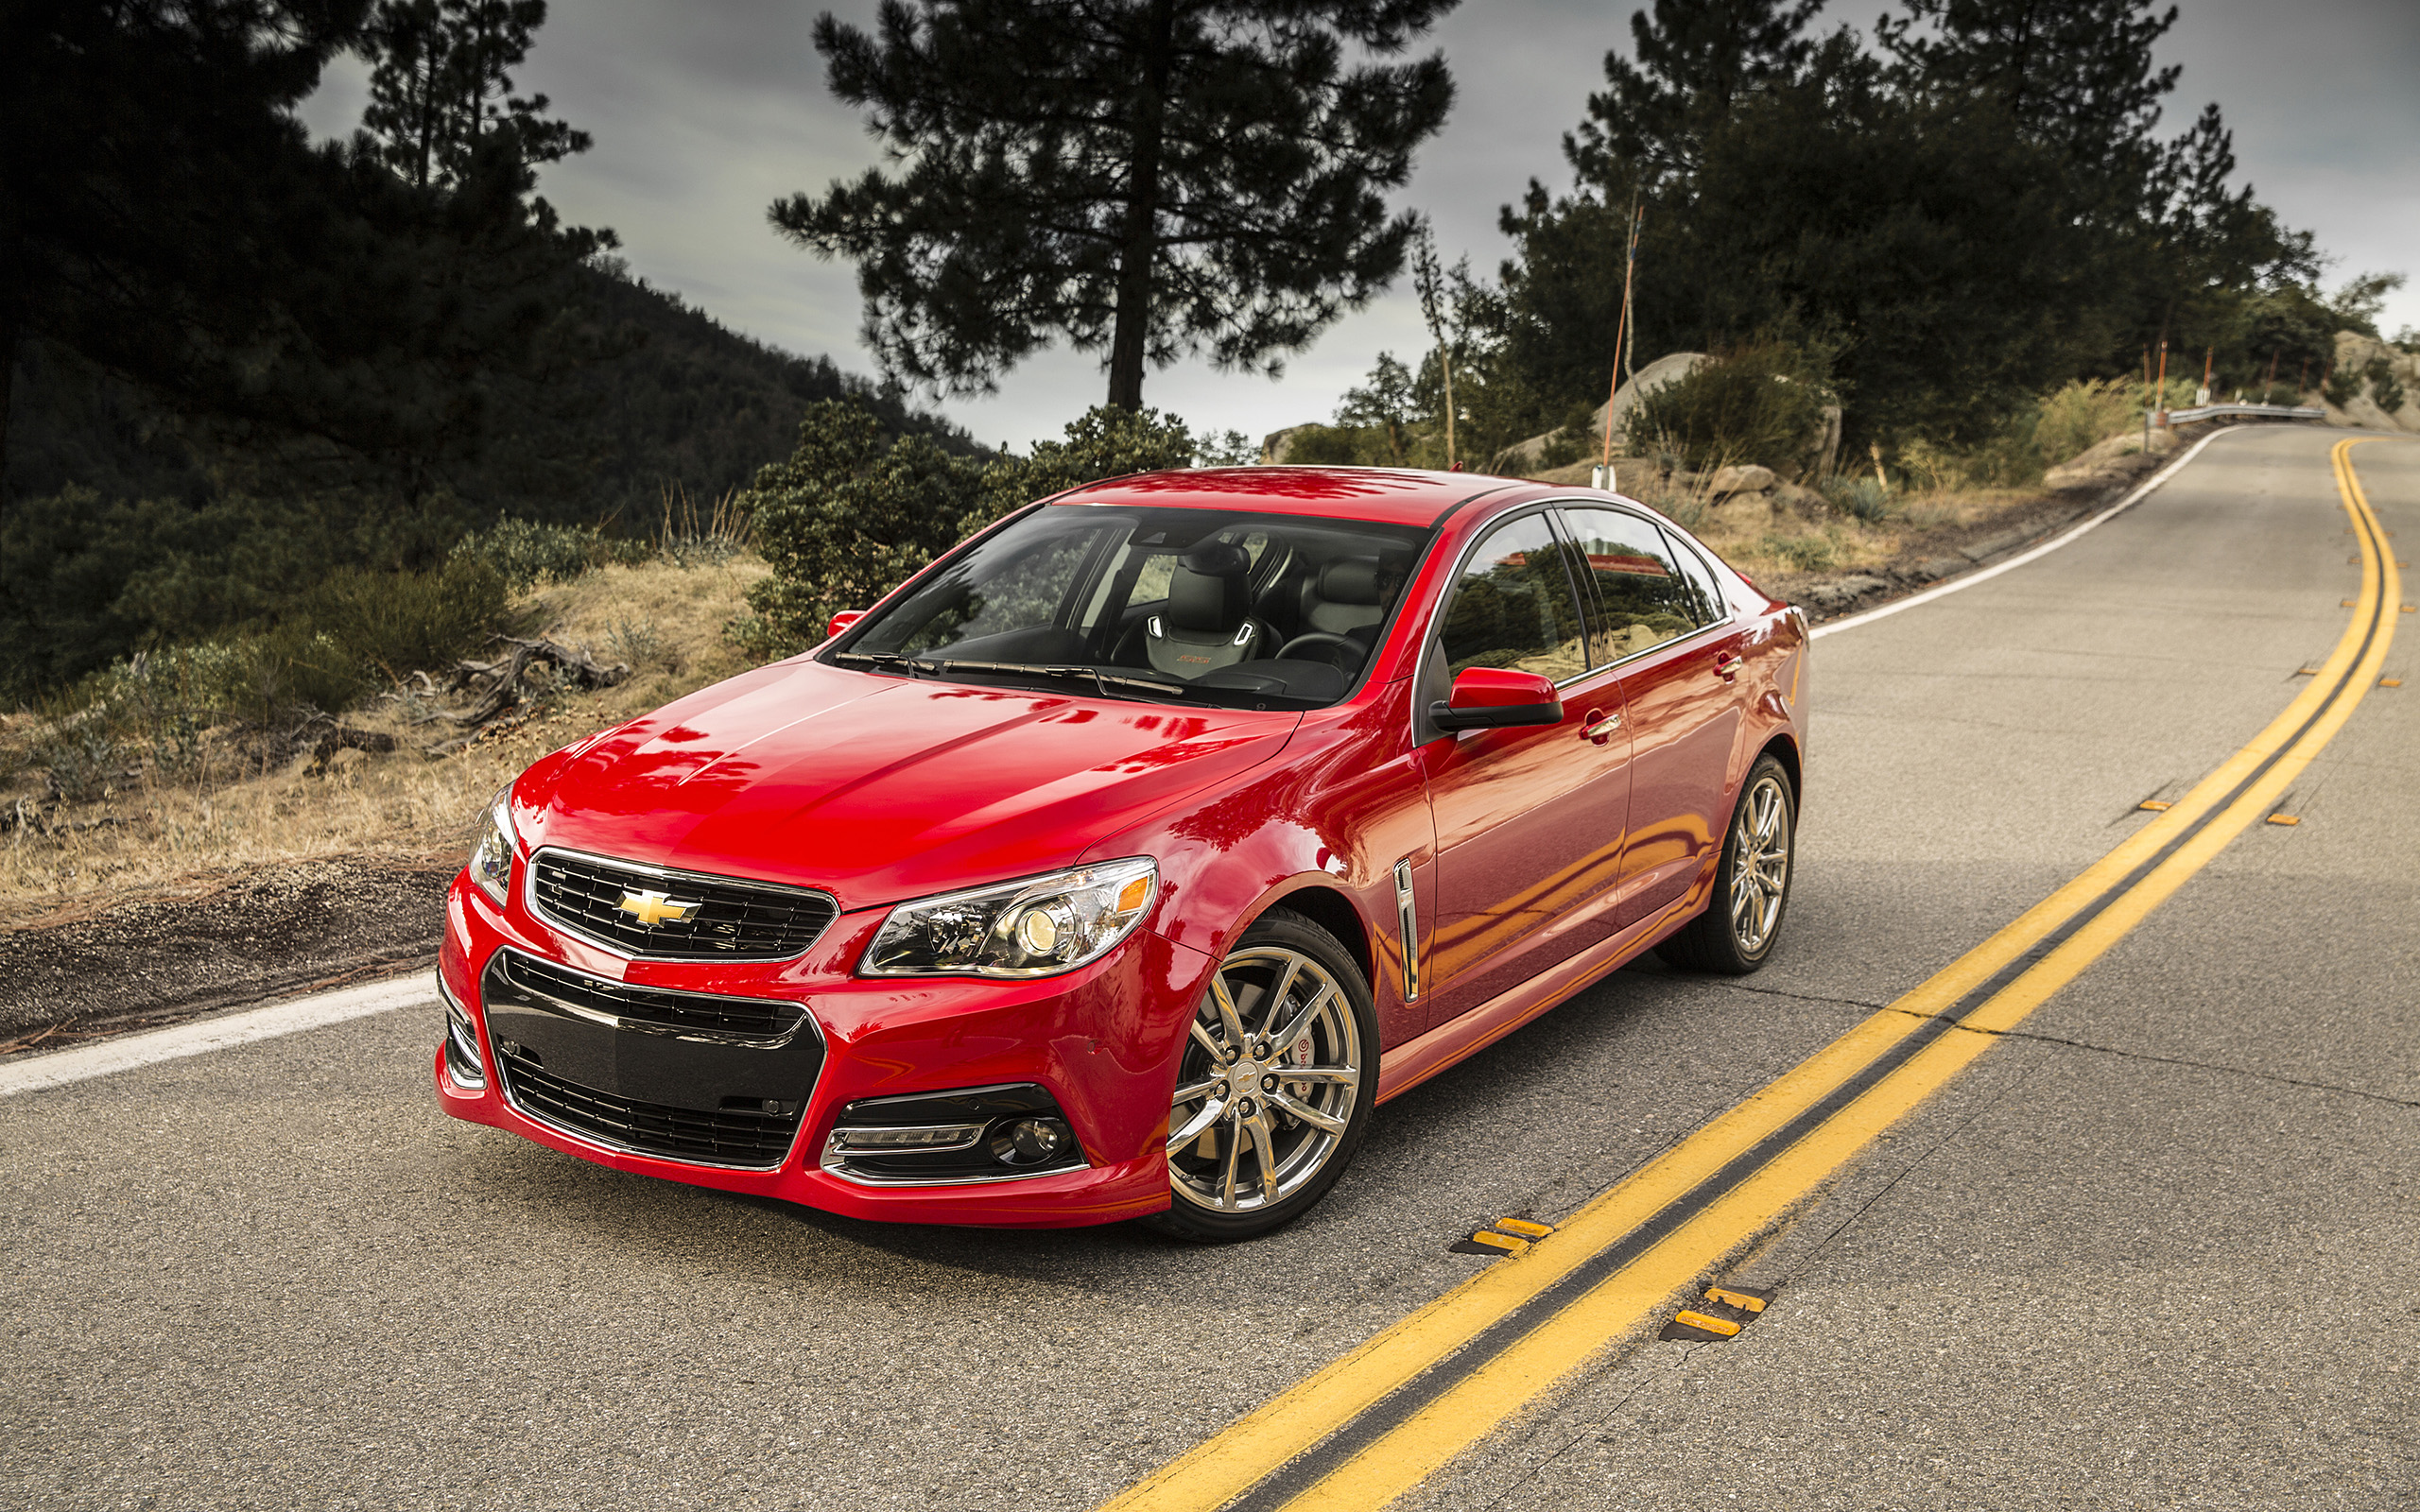 Vehicles Chevrolet SS HD Wallpaper | Background Image